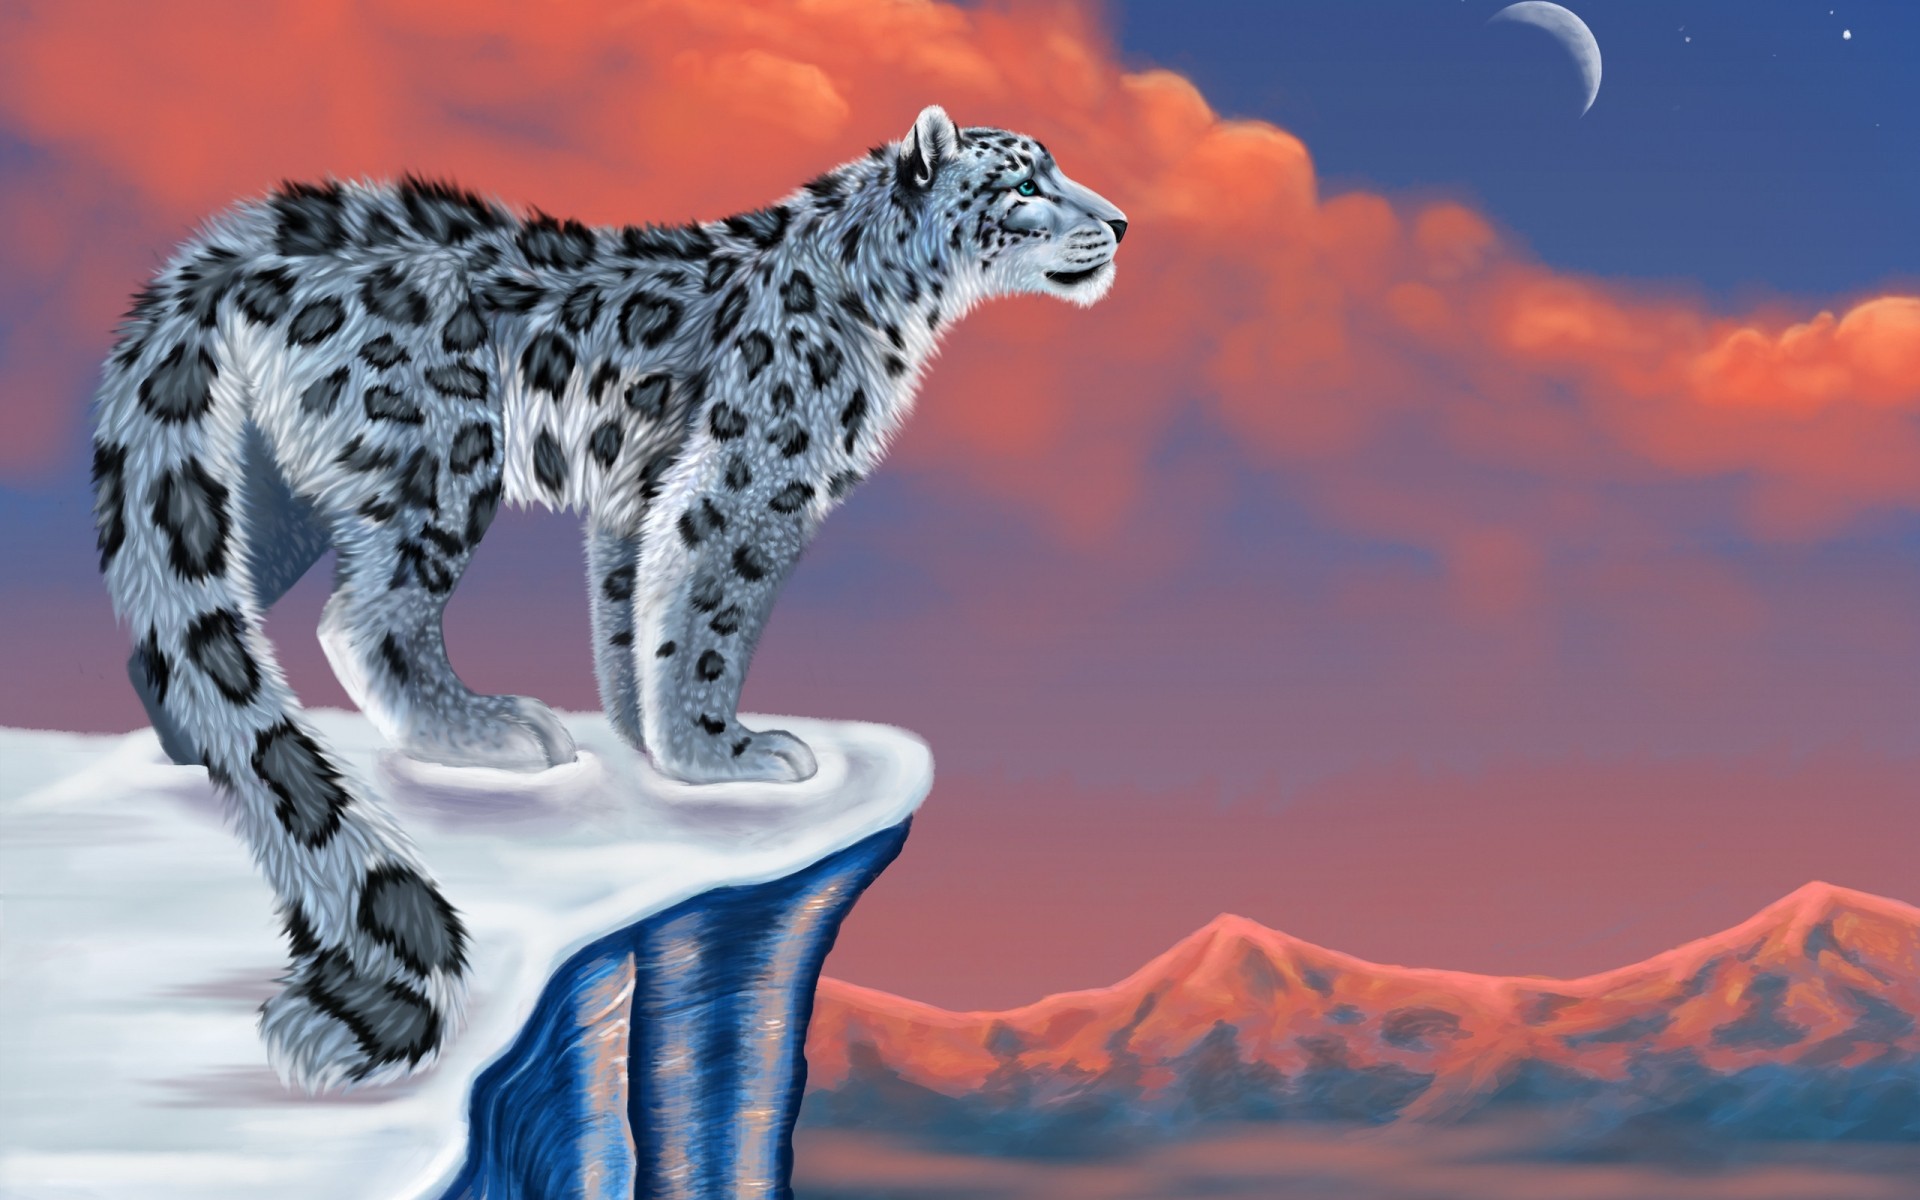 drawings nature mammal outdoors snow sky snow leopard leopard